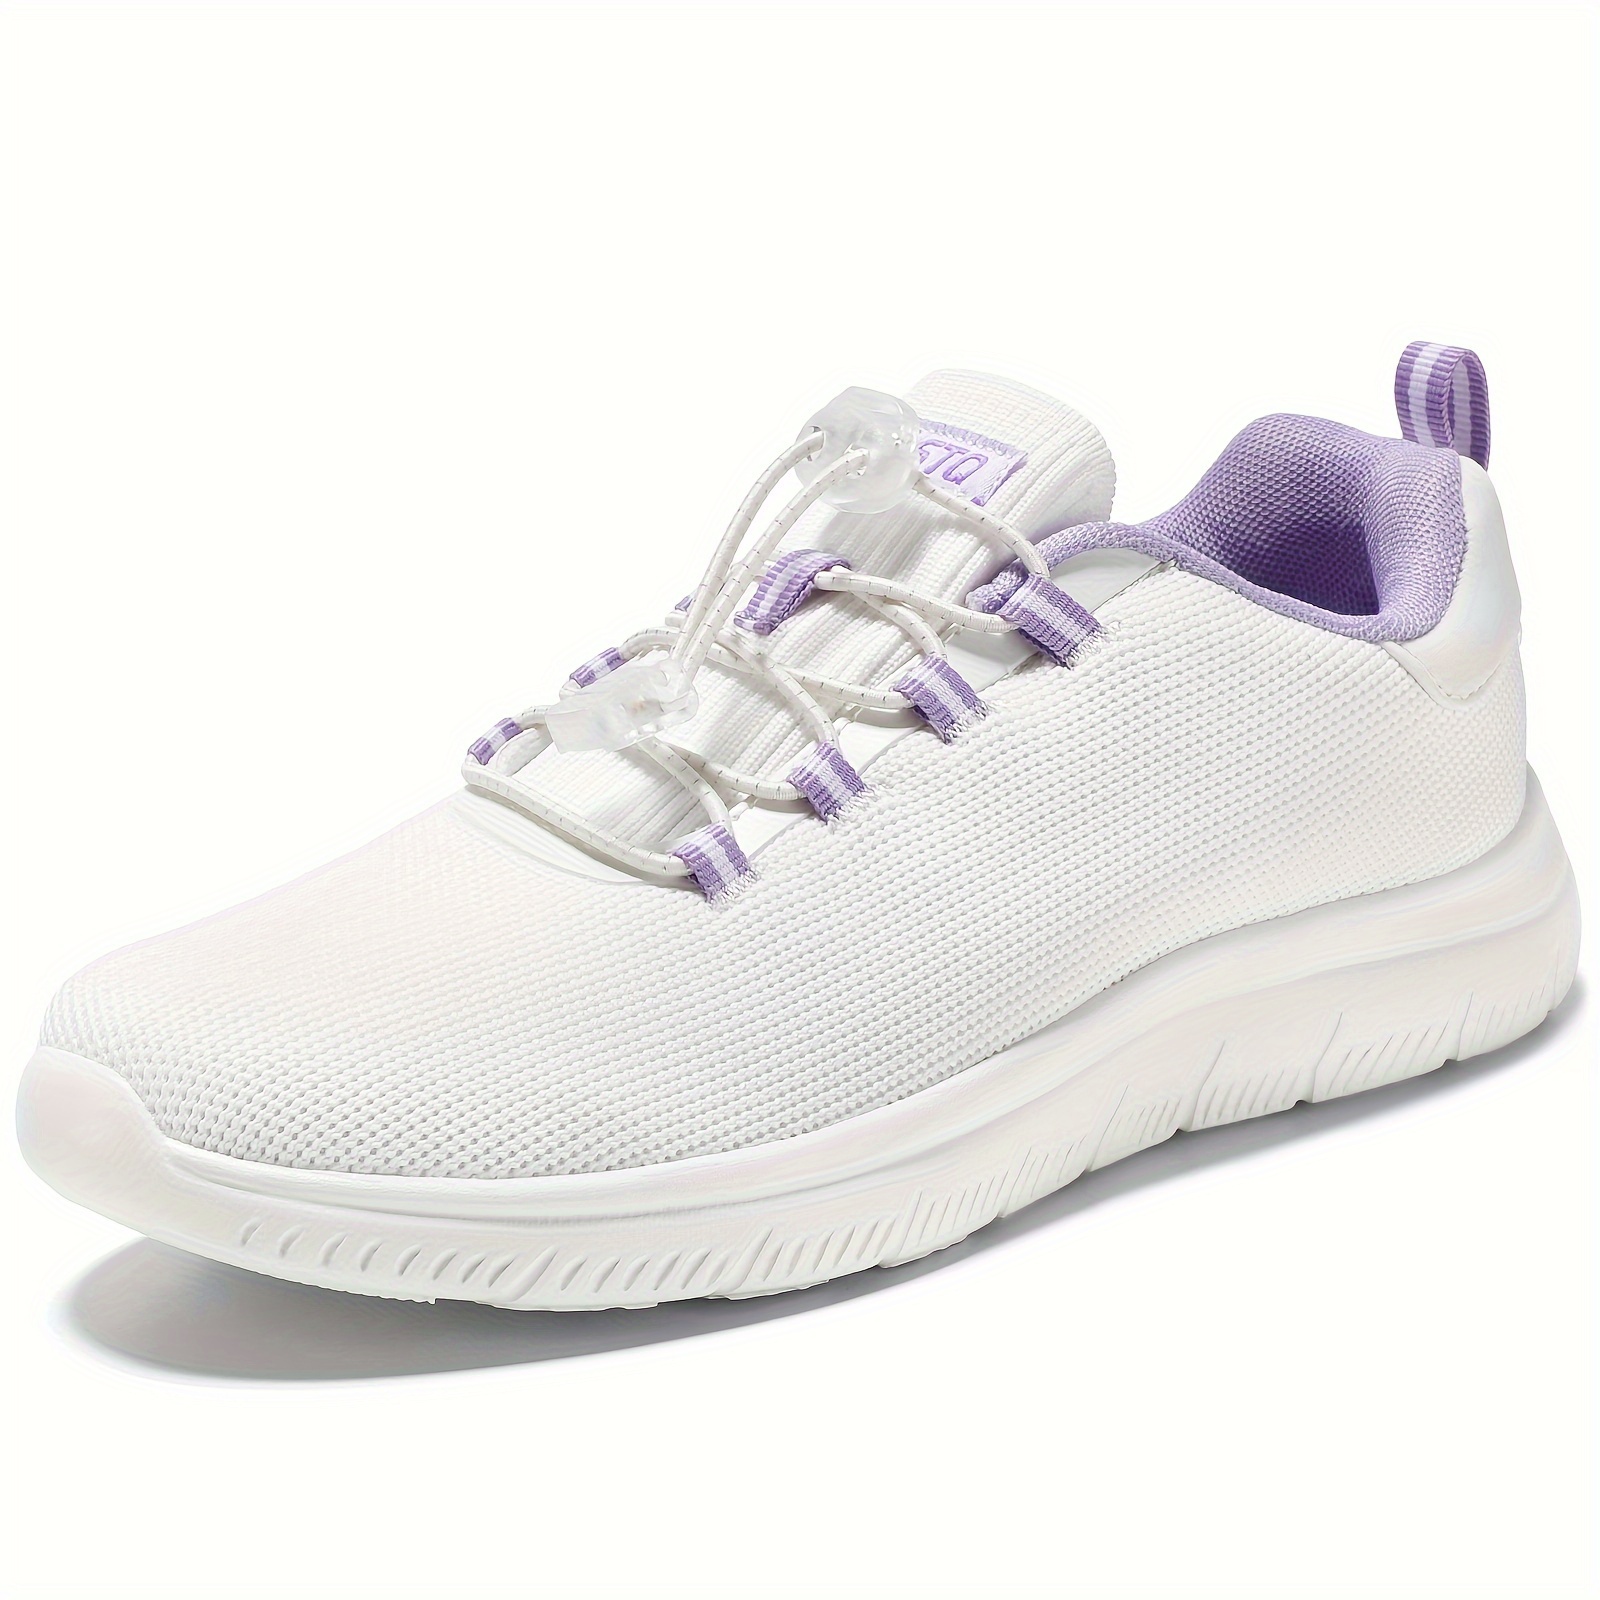 

Women's Slip-on Sneakers, Ultra-light Orthopedic Walking Shoes, Sporty Style, Fabric Material, Hands-free Comfort Design